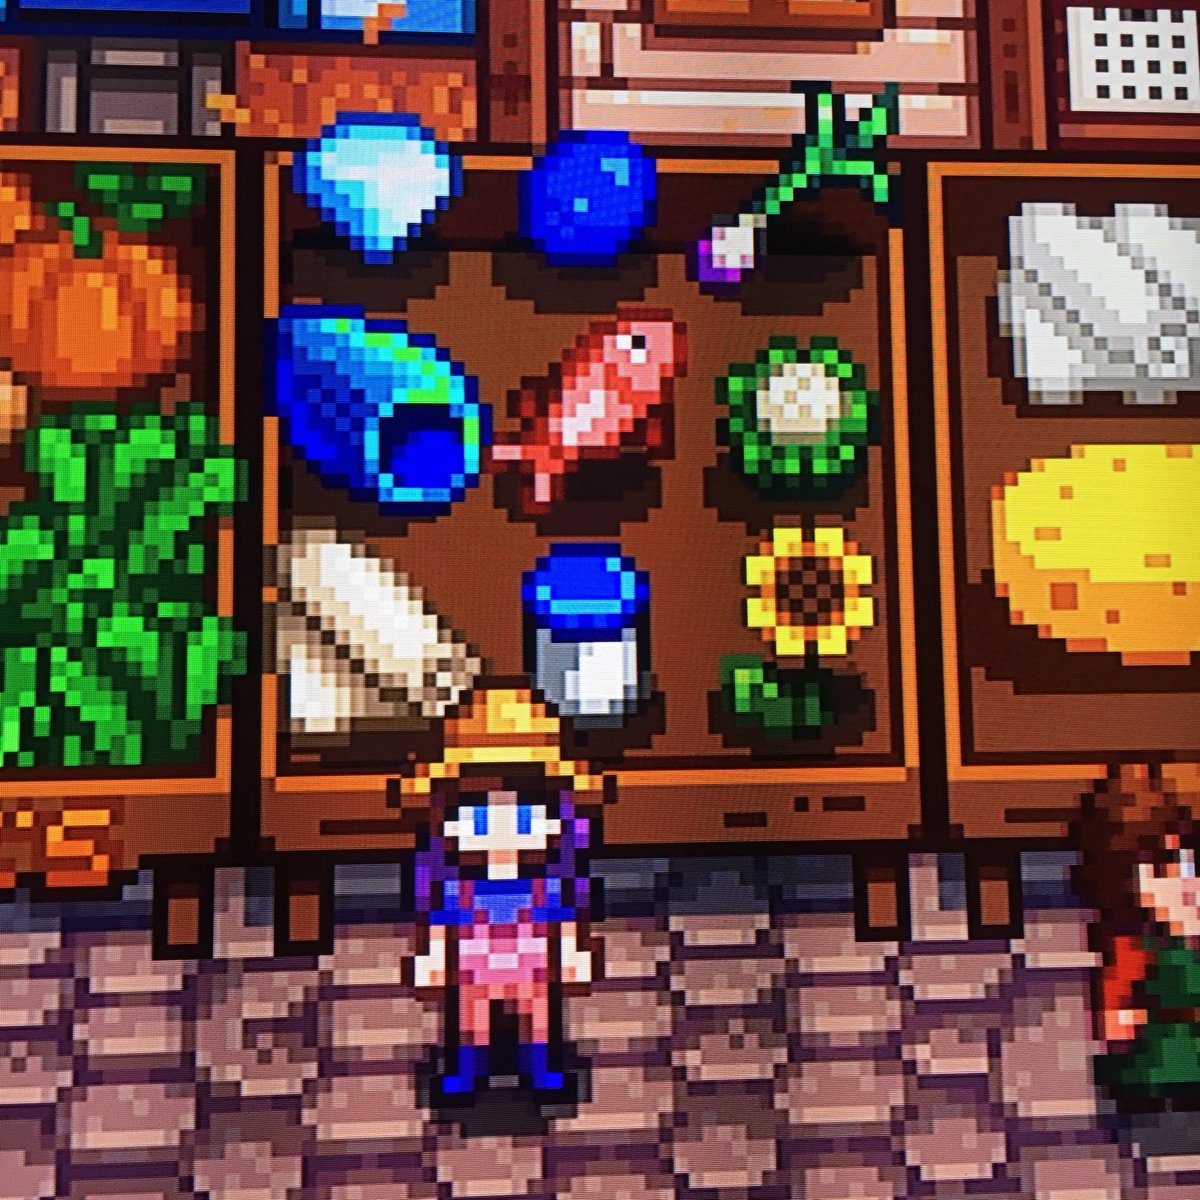 Brigid Hill Clutching It On Stardew Look At That Rainbow Shell Stardewvalley Makemoney T Co Klv4aglj9d Twitter